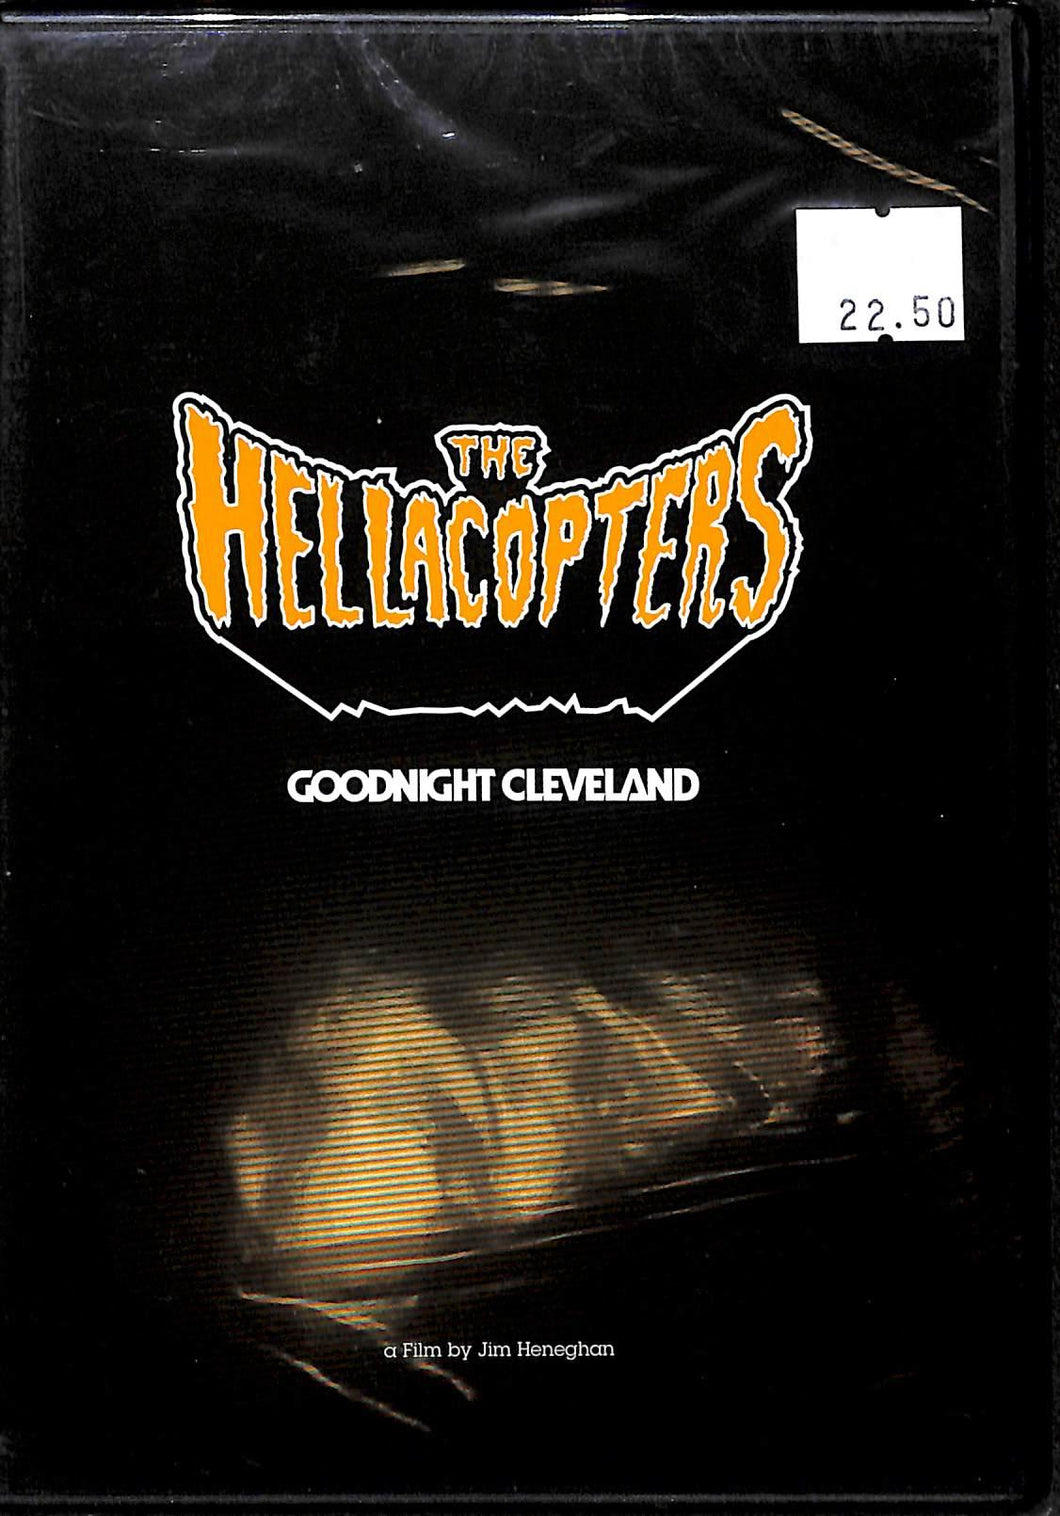 Dvd - The Hellacopters - Goodnight Cleveland